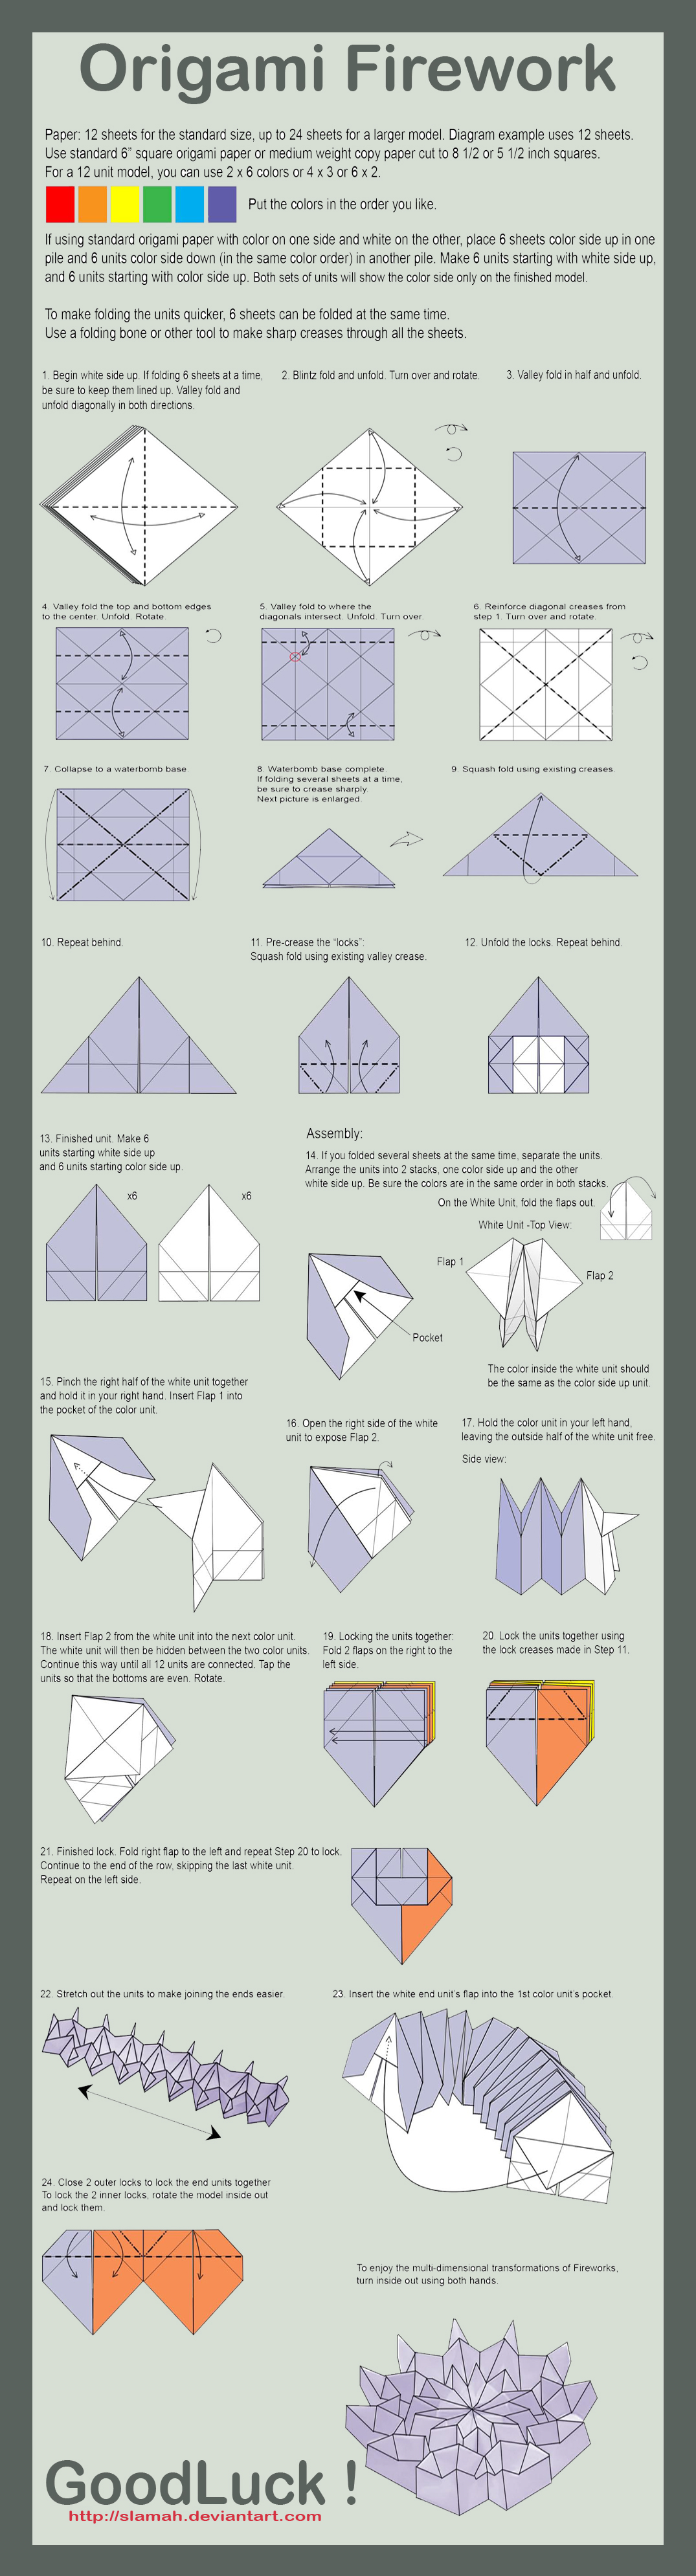 fireworks origami instructions